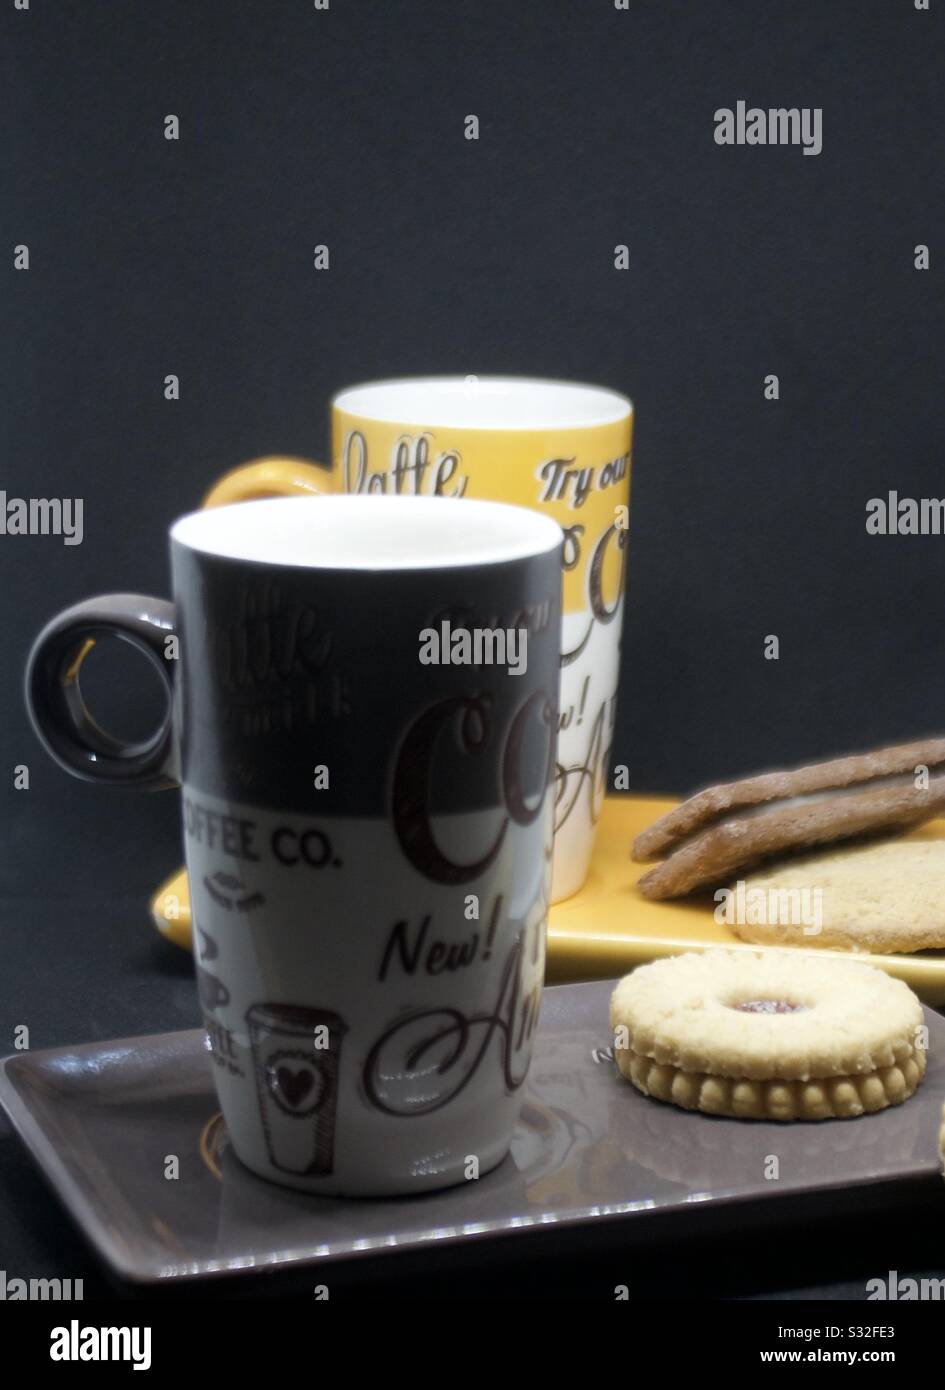 https://c8.alamy.com/comp/S32FE3/espresso-cups-with-saucer-and-biscuits-S32FE3.jpg